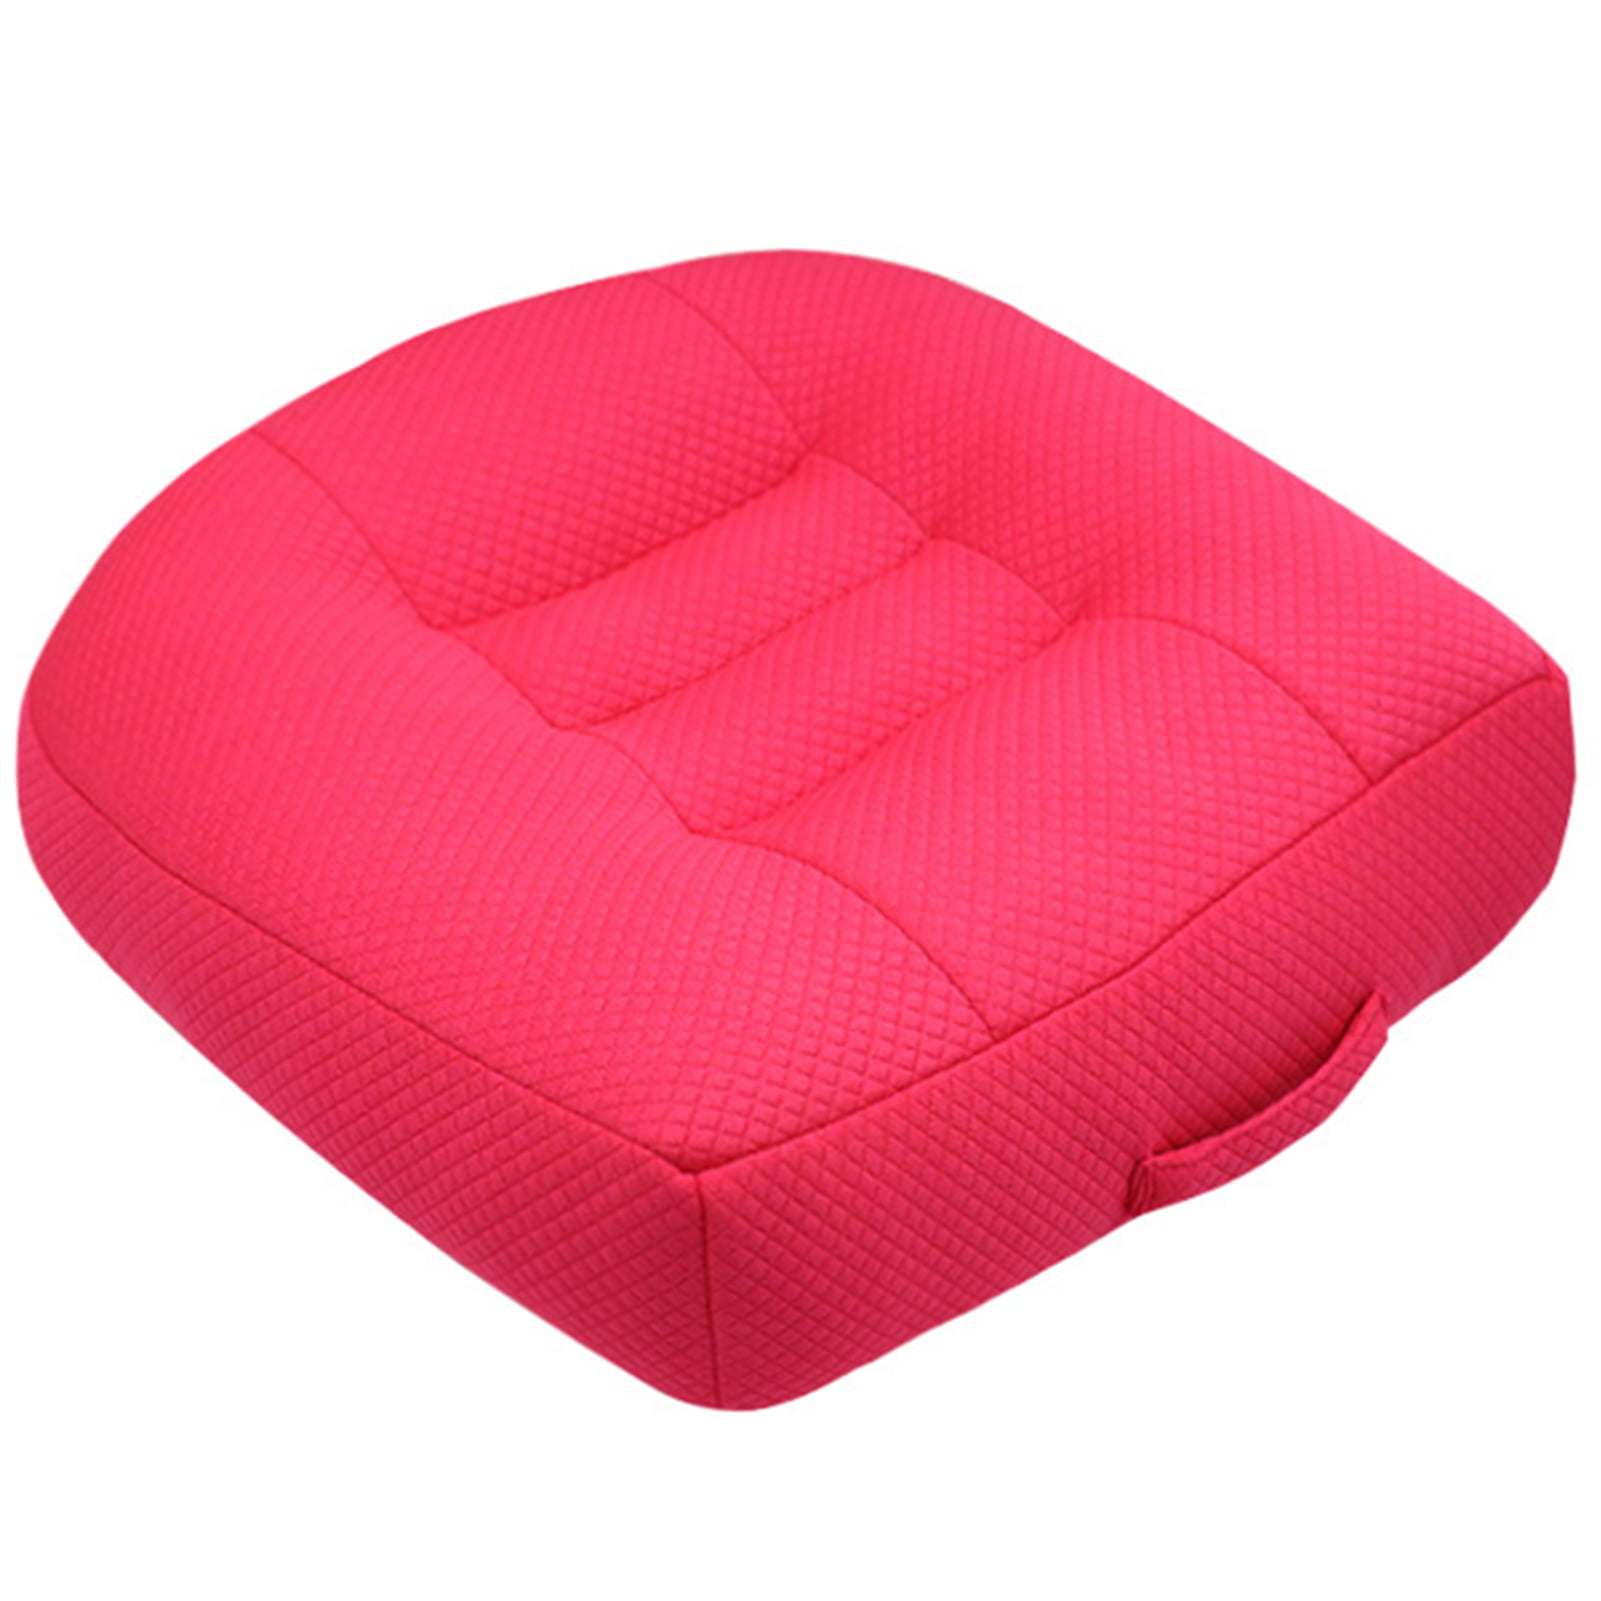 Black Car Booster Seat Cushion Heightening Height Boost Mat,Breathable Mesh Portable Car Seat Pad Fatigue Relief Suitable for Trucks,Cars,SUVs,Office Chairs,Wheelchairs 